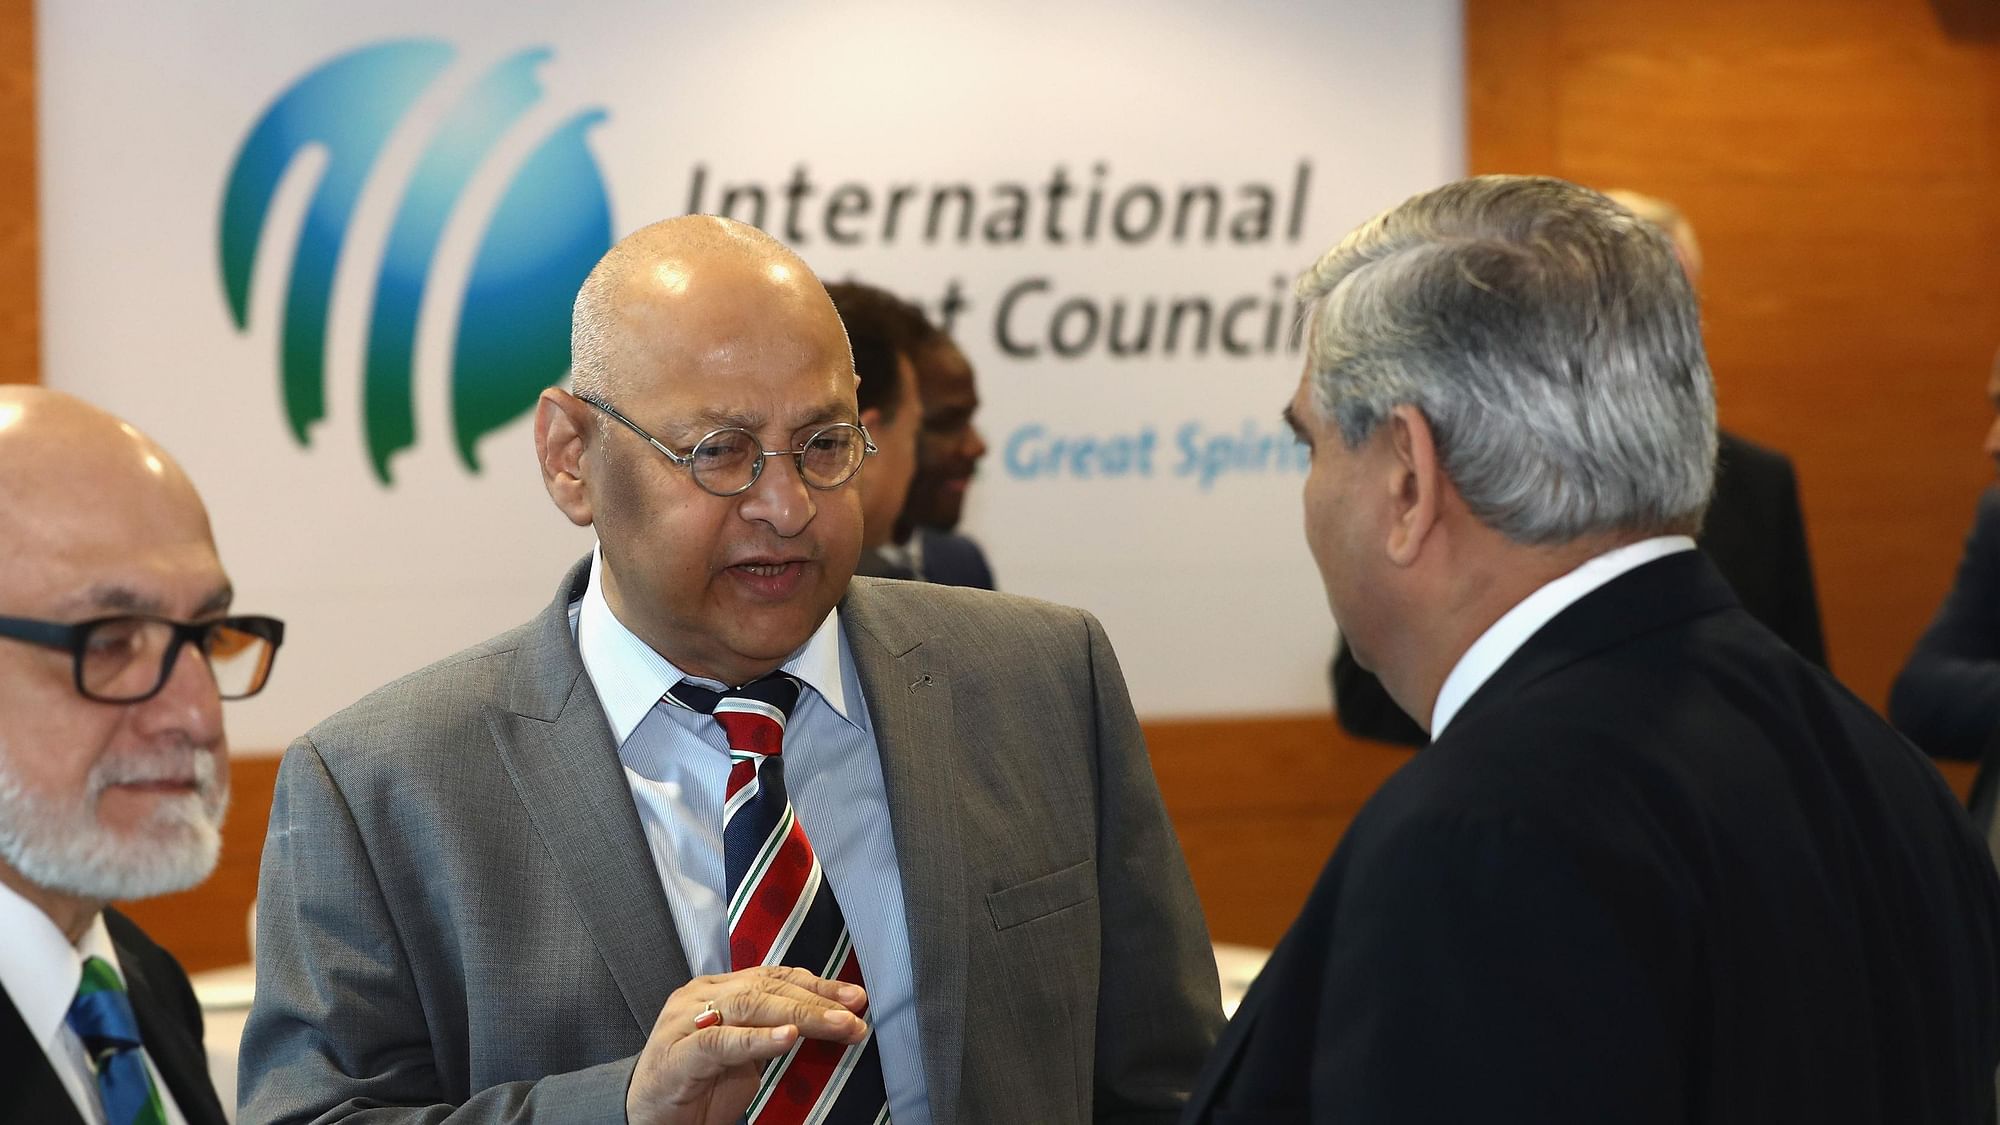 The International Cricket Council has turned down the BCCI’s request to sever ties with countries from which “terrorism emanates”.